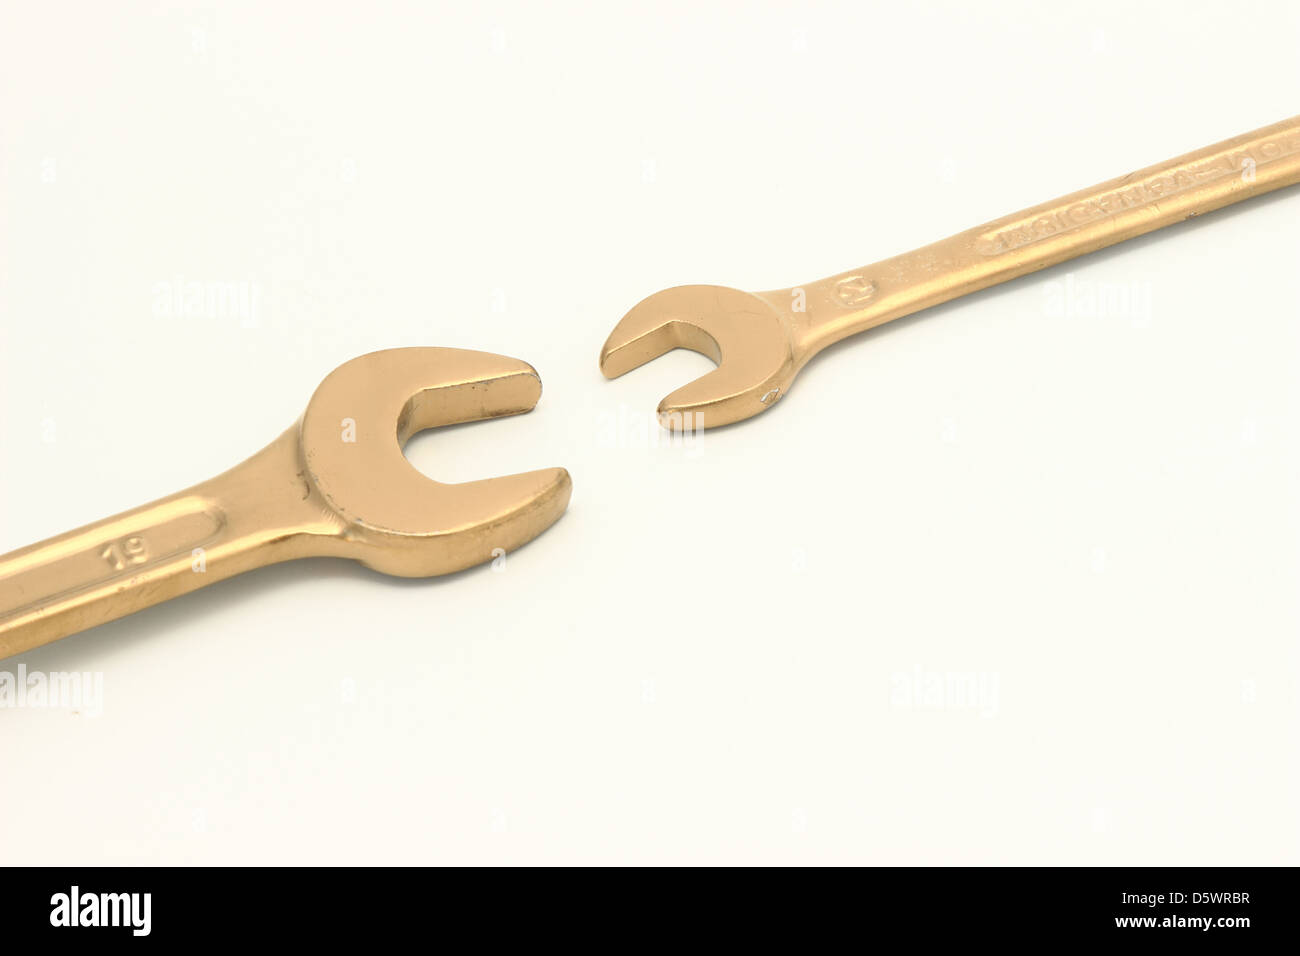 Golden wrench - The cost of labor Stock Photo: 55271547 - Alamy